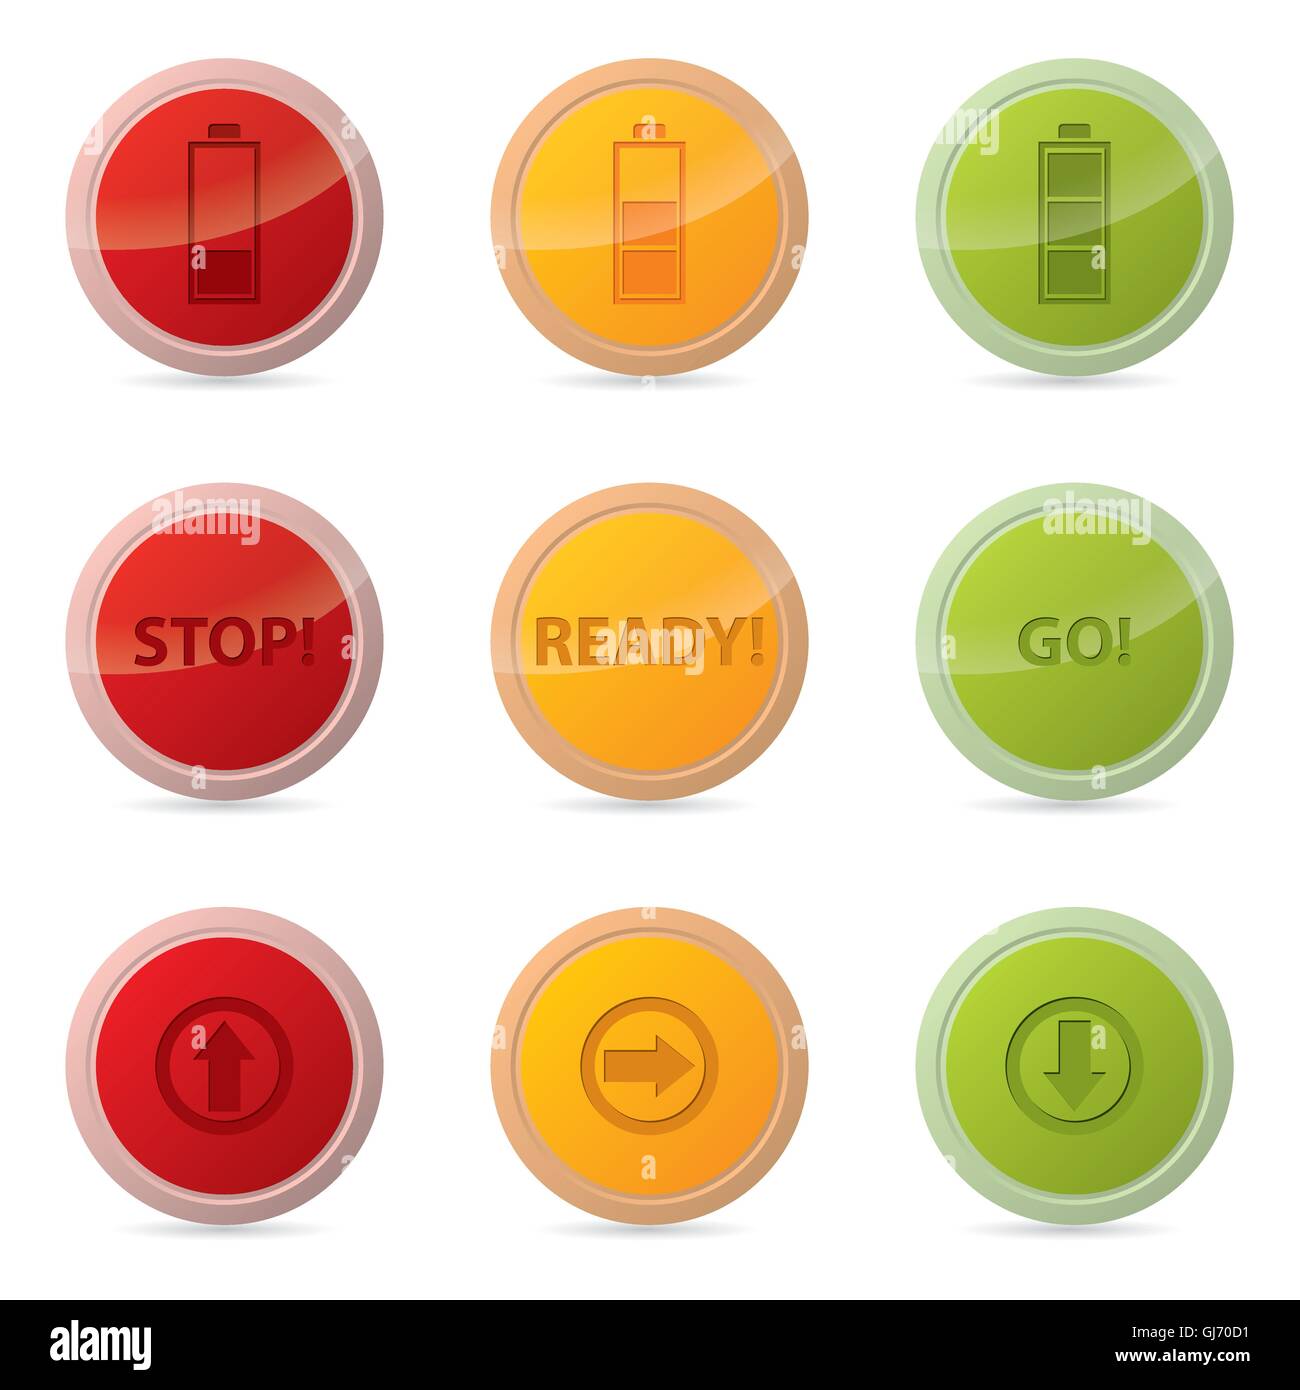 Web button set with various icons Stock Vector